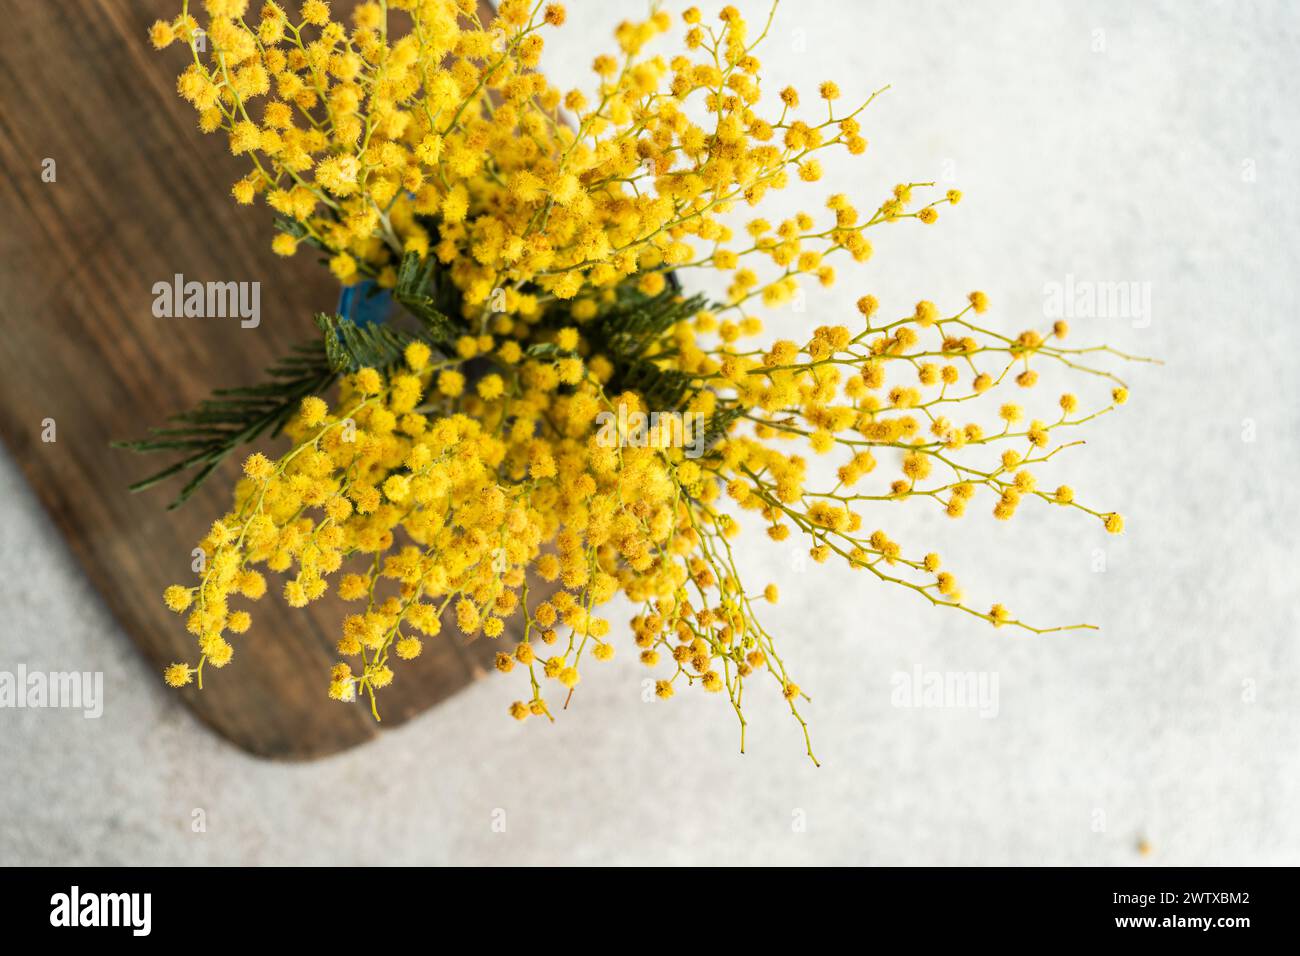 Overhead view of a bunch of yellow mimosa stems in a vase on a wooden chopping board Stock Photo